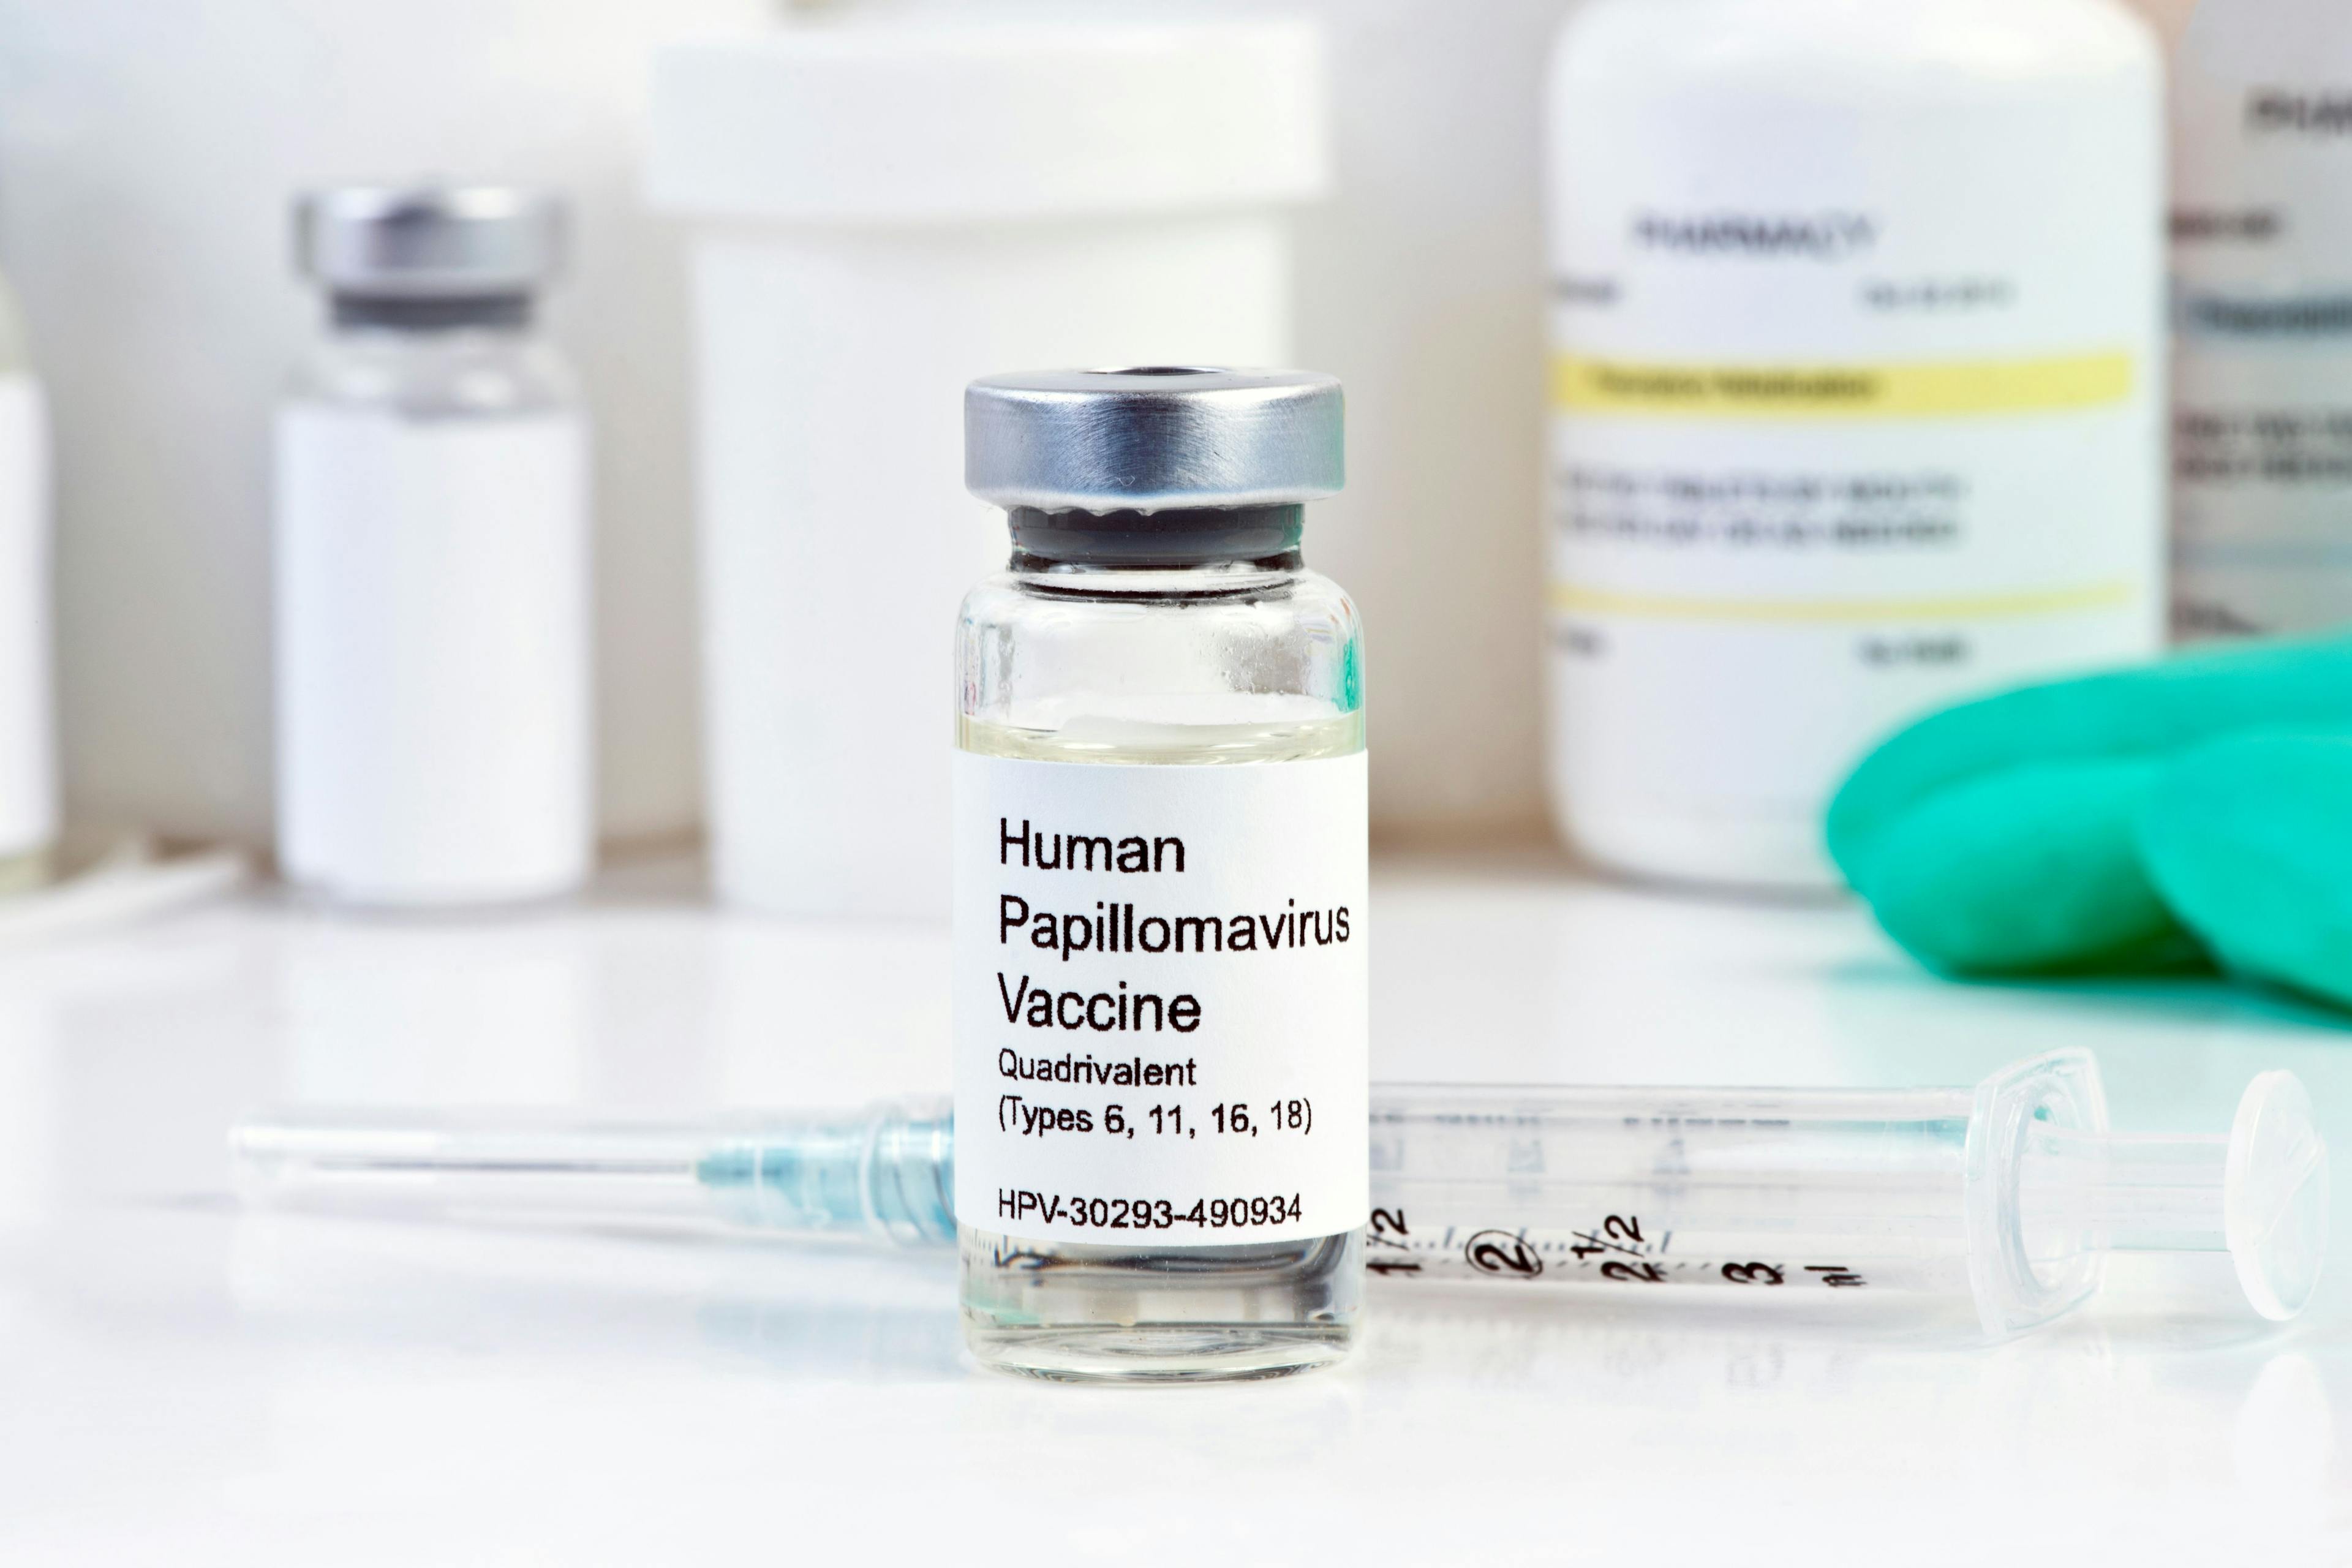 Increased HPV Knowledge Could Lead to Increased Vaccination Rates 